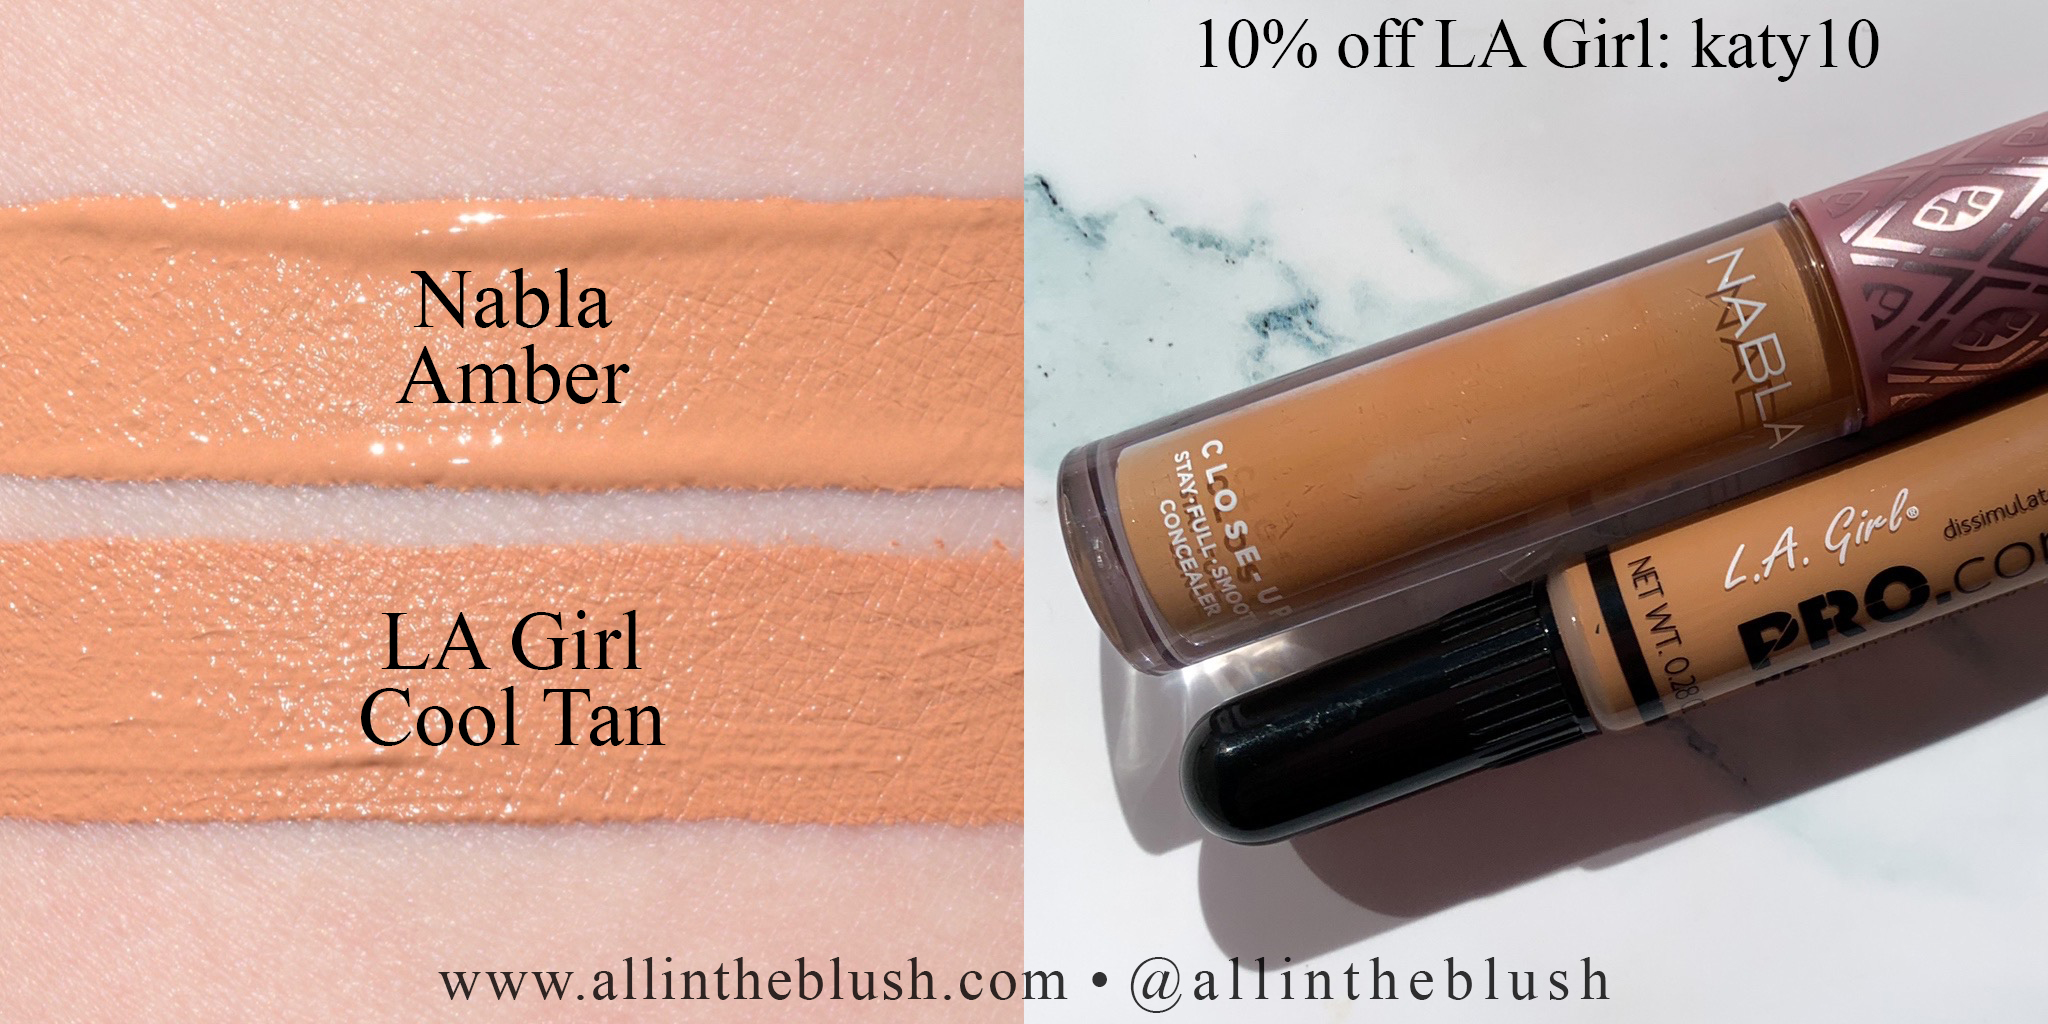 Afstemning . undergrundsbane Shade Dupe: LA Girl HD Pro.Conceal Cool Tan - All In The Blush